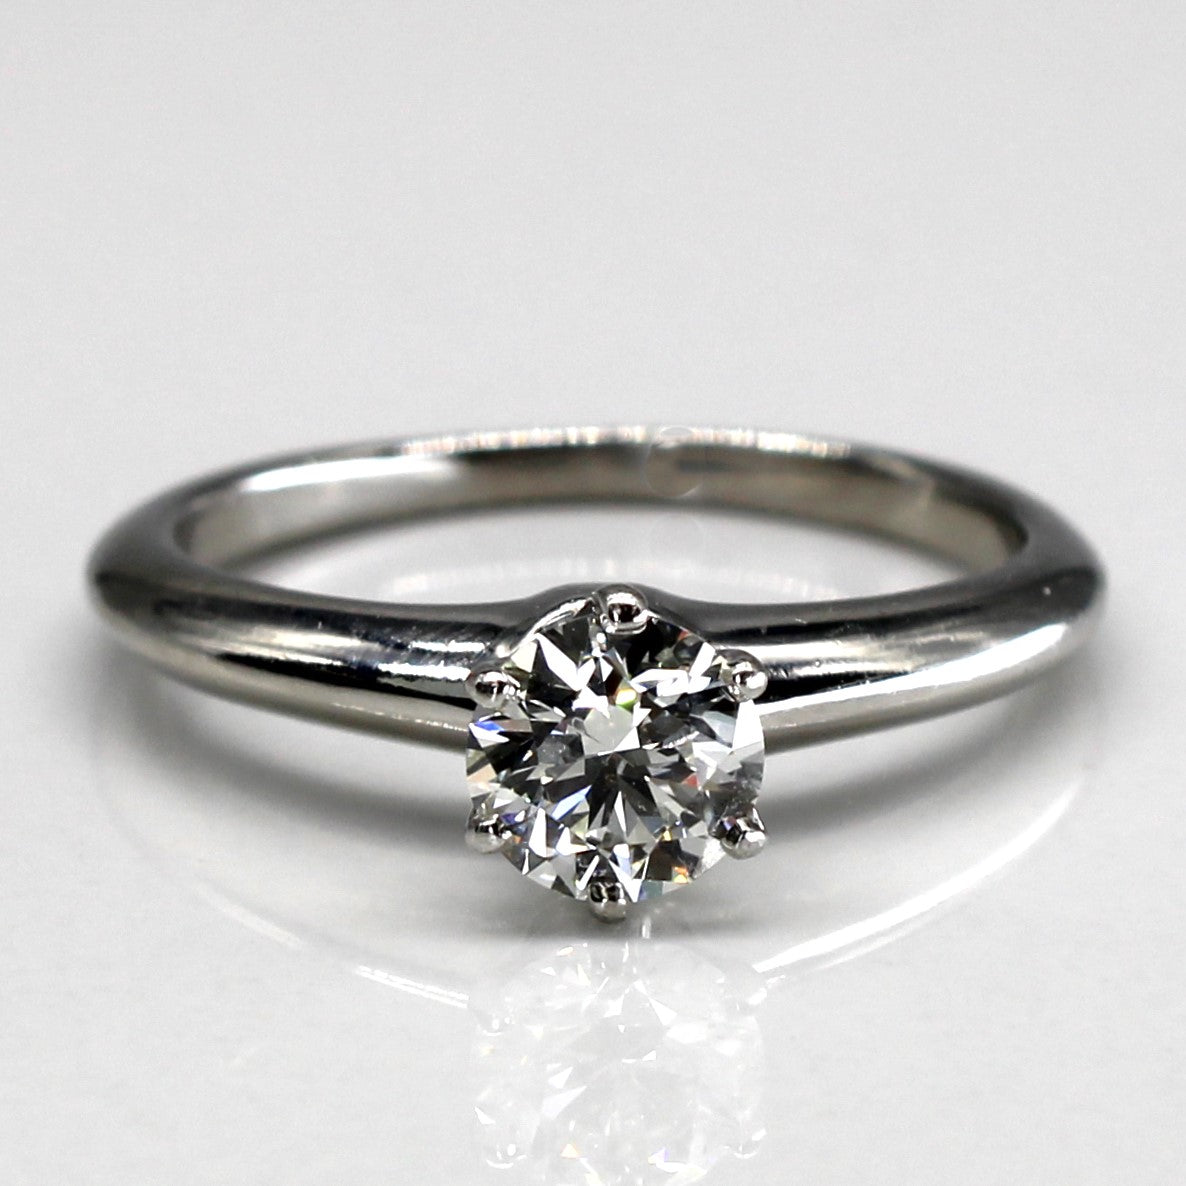 'Tiffany & Co.' Solitaire Diamond Engagement Ring | 0.60ct | SZ 6.25 | - 100 Ways